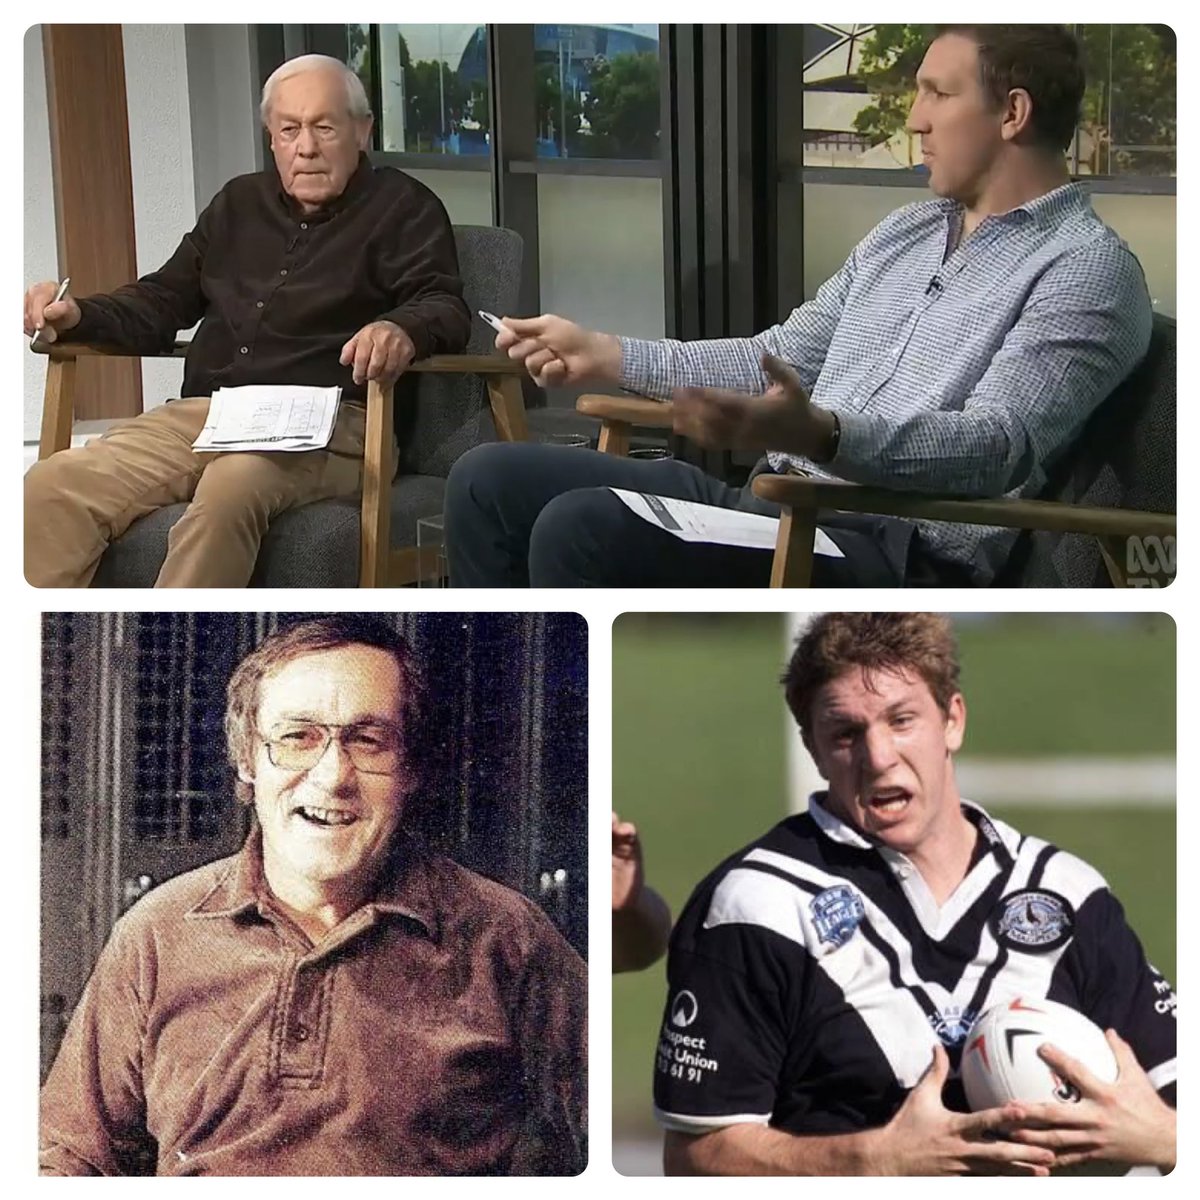 Magpie Coaching Legend Roy Masters & Magpie 2002 SG Ball (and later @storm) Premiership Winner @RyanHoffman12 together as panelists on ABC TV Offsiders Program Discussing the 2023 @NRL Grand Final 🏉🏆

The @westsmagpies Family 🏴🏳️

Campbelltown Collegians RLFC